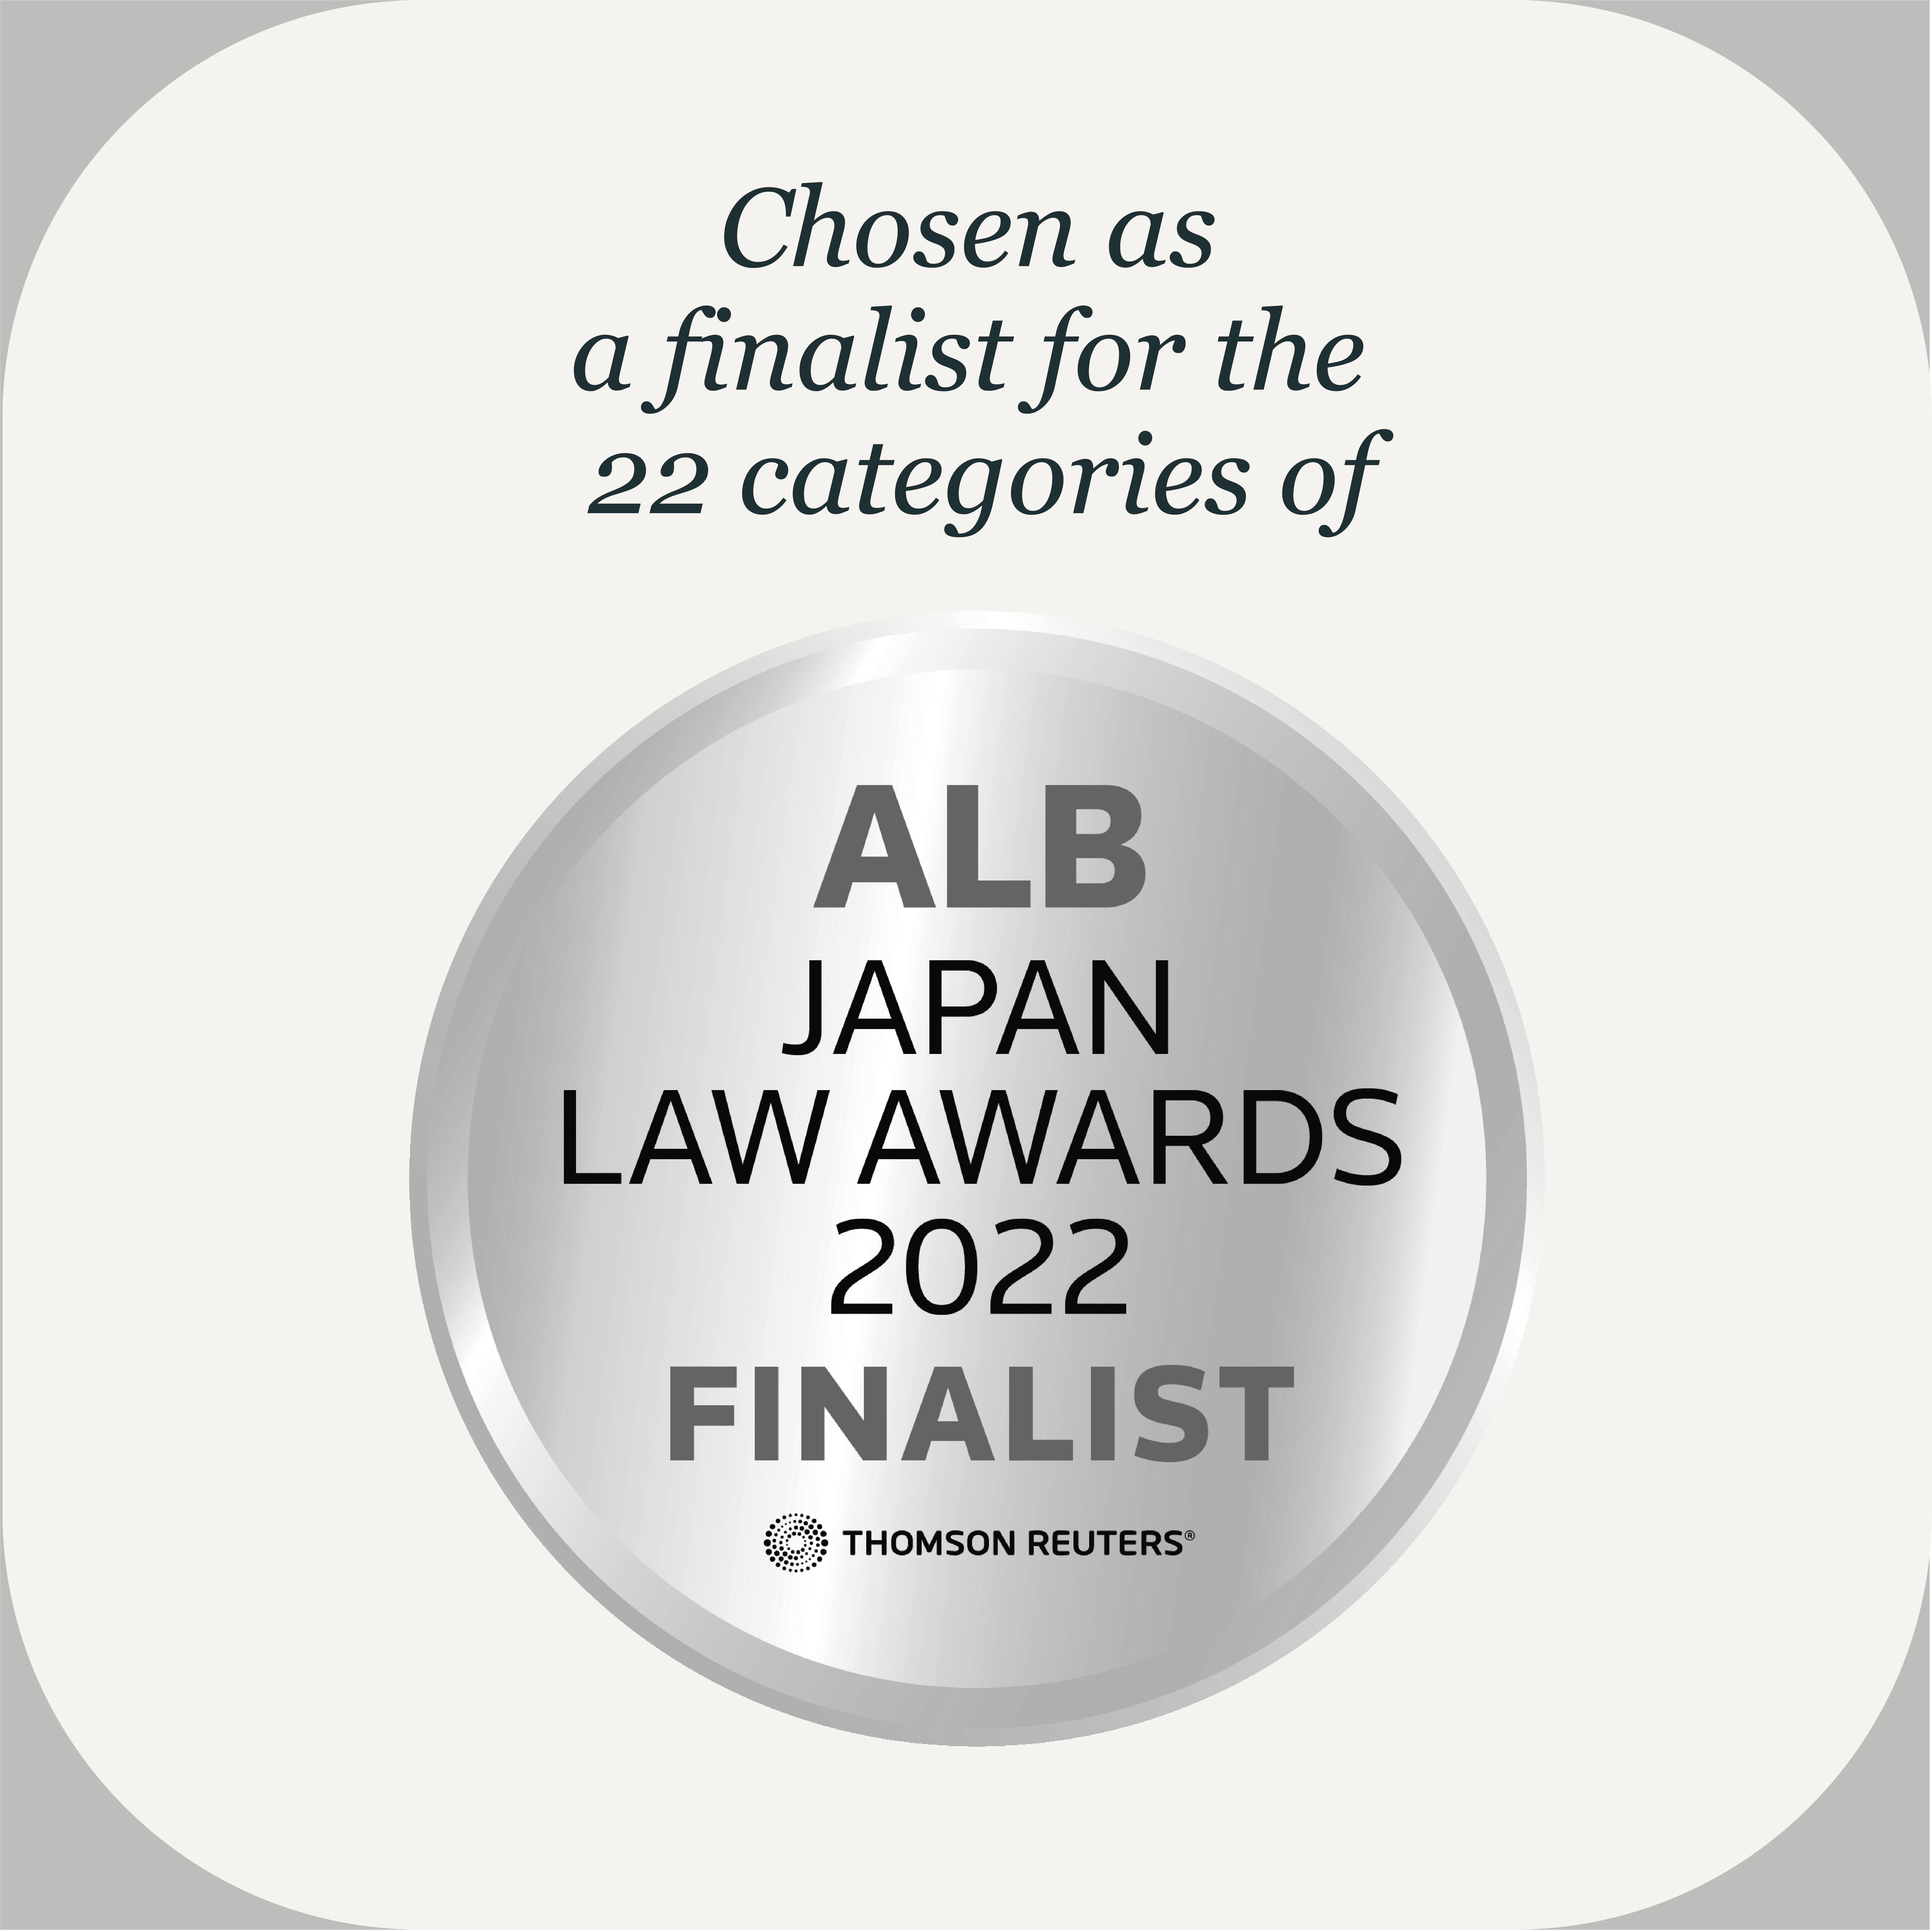 Atsumi & Sakai has been chosen as a finalist for the 22 categories of Asian Legal Business (ALB) Japan Law Awards 2022